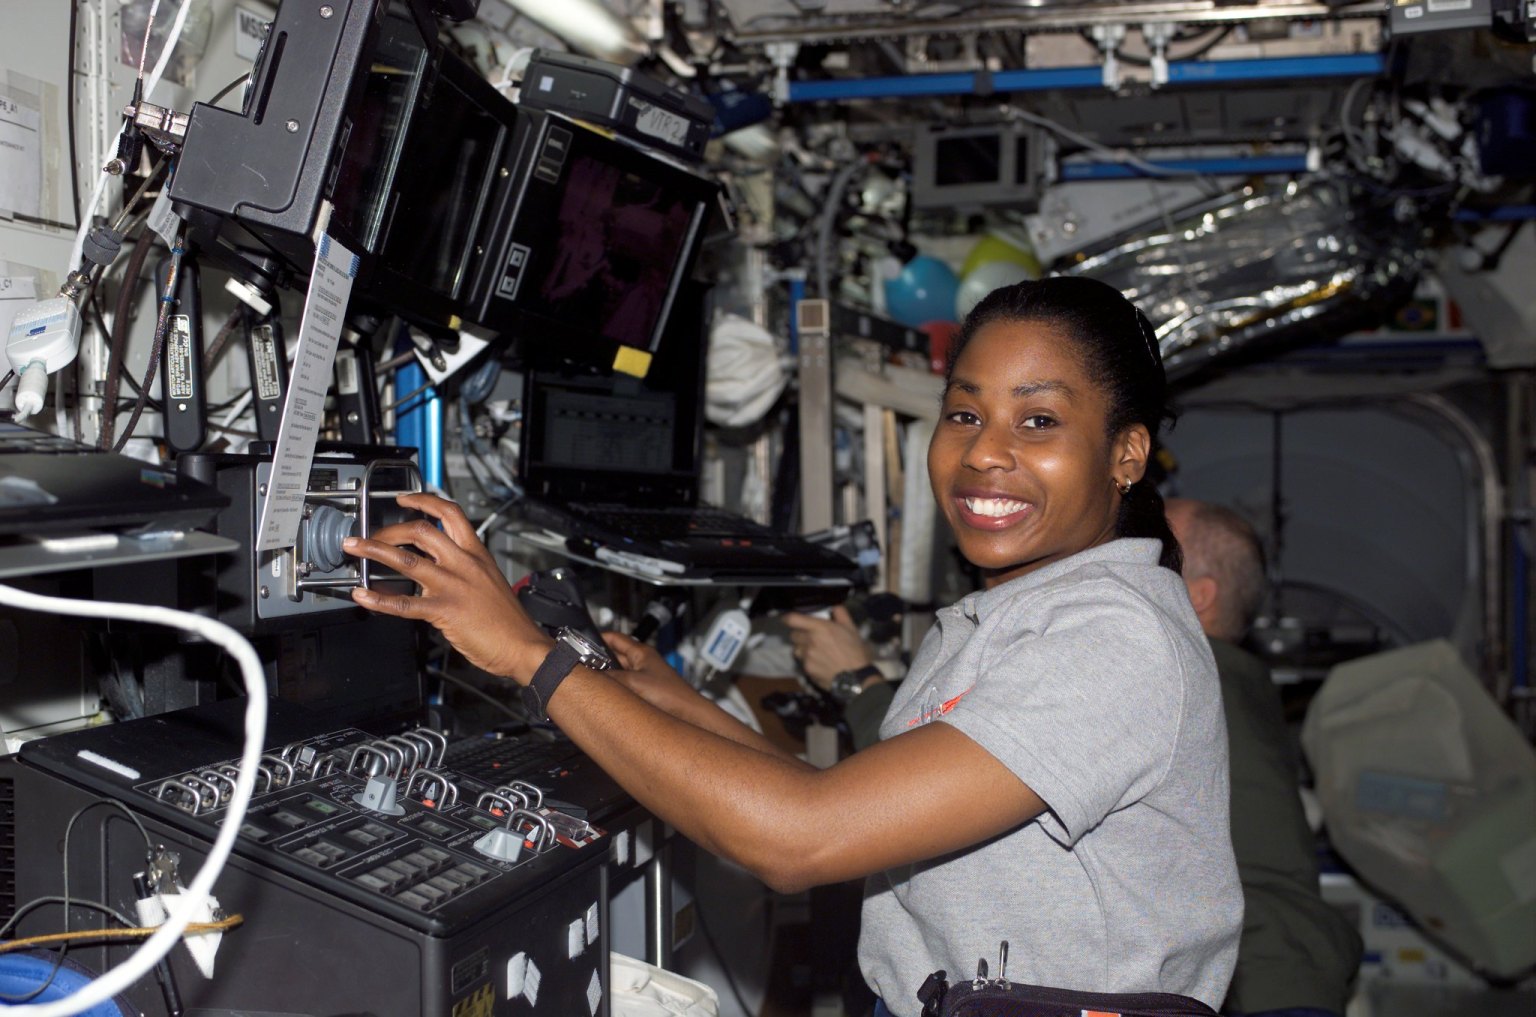 Astronaut Stephanie D. Wilson, STS-121 mission specialist, works with the Mobile Service System (MSS) and Canadarm2 controls in the Destiny laboratory of the International Space Station while Space Shuttle Discovery was docked to the station.